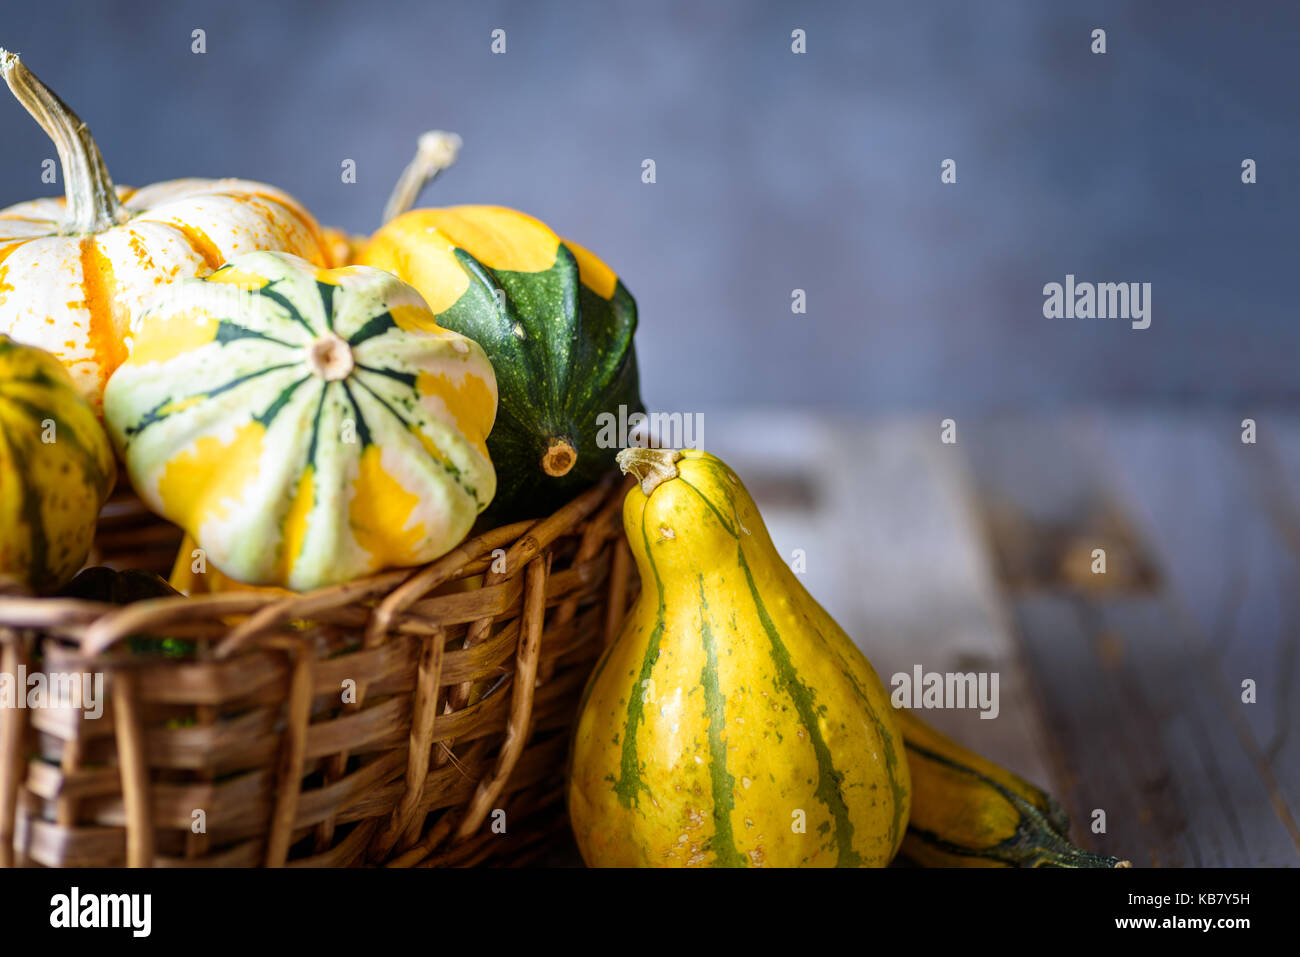 Closeup of decorative gourds and pumpkins in a basket on natural rustic wooden background Stock Photo